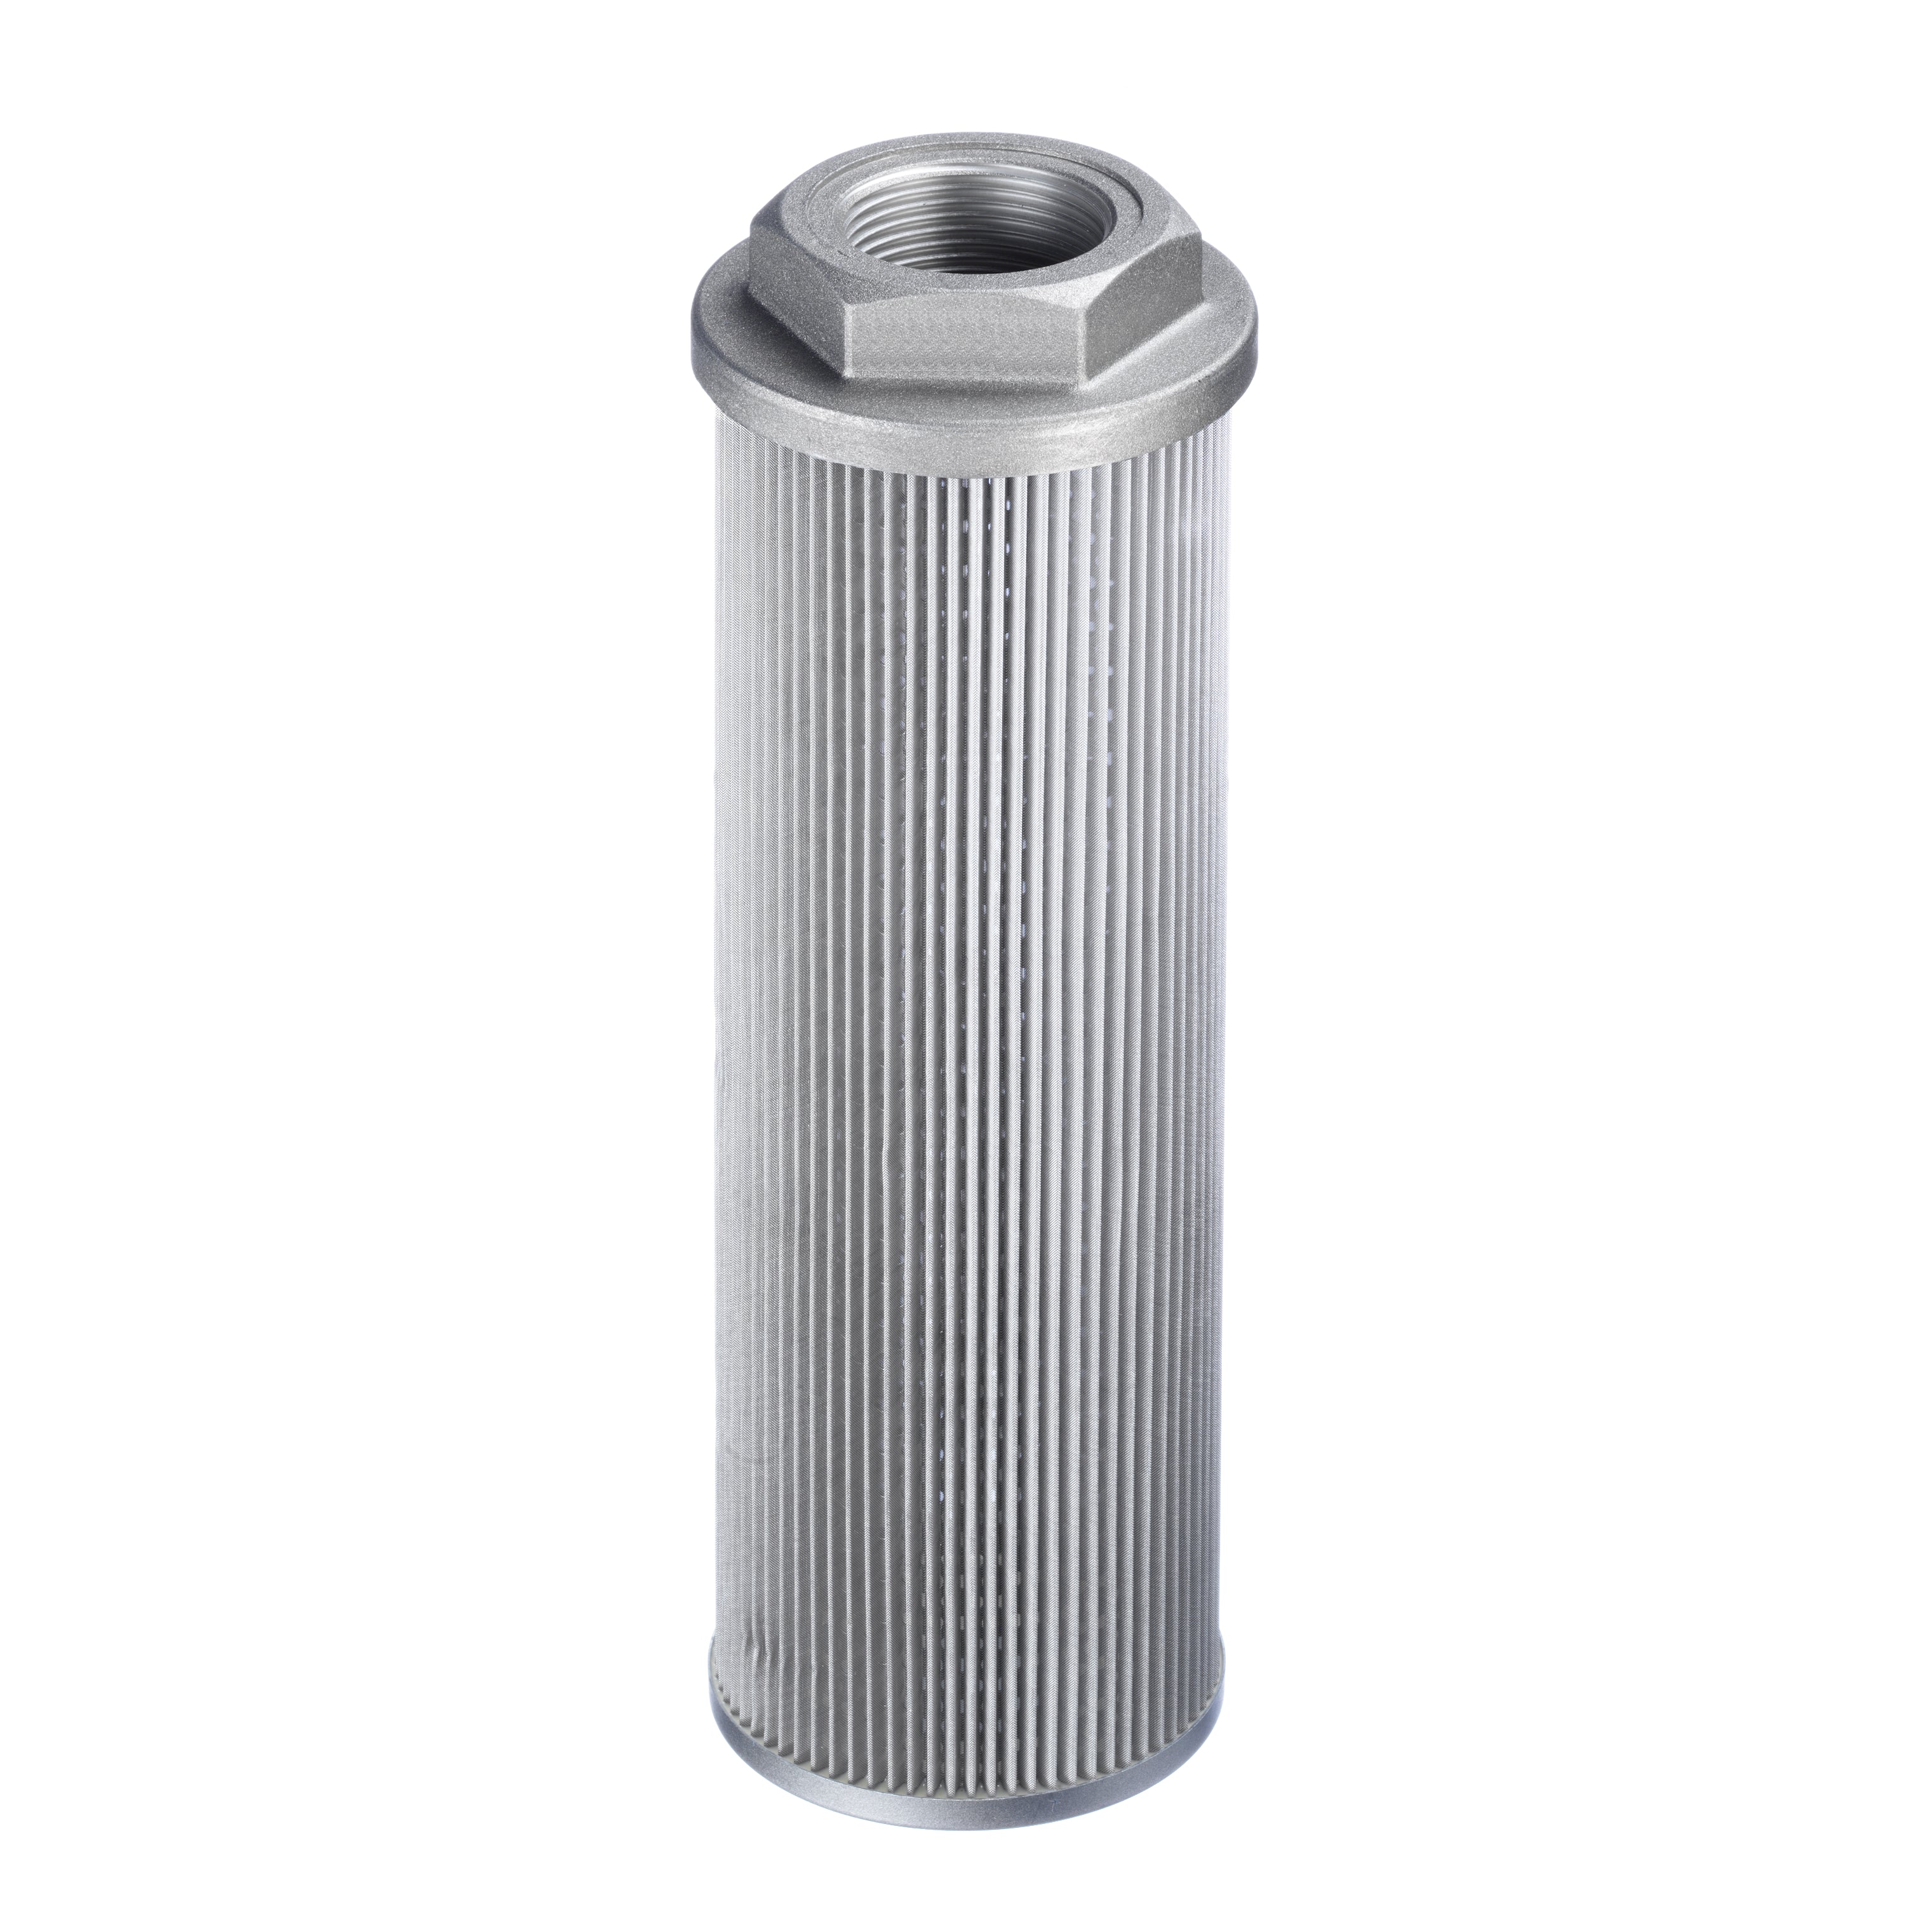 SUS-088-N20-195-125-A-B0.2 : Stauff Suction Strainer, Aluminum End Cap, 1.25" NPT, 16.9GPM, 125 Micron, 3psi Bypass